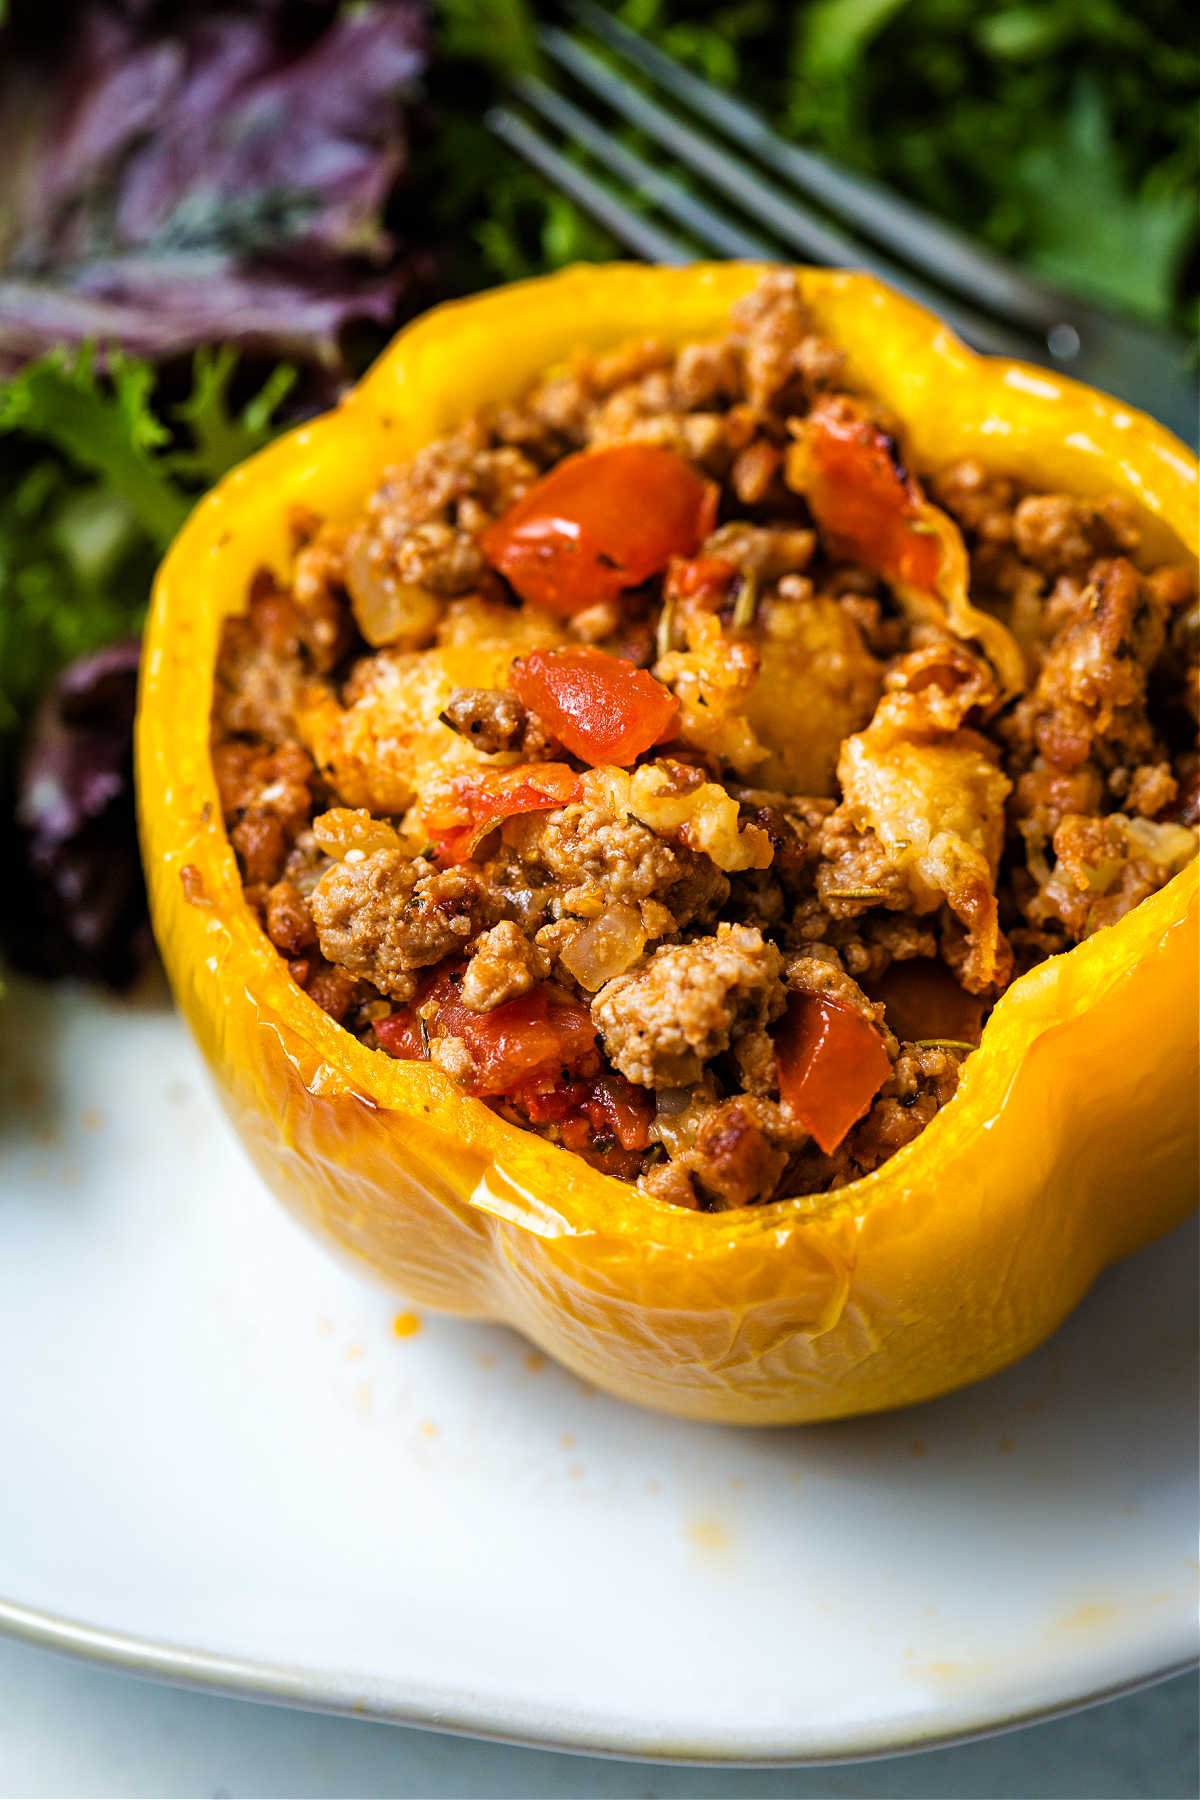 a yellow bell pepper stuffed with saucy turkey mixture on a plate with a side salad.